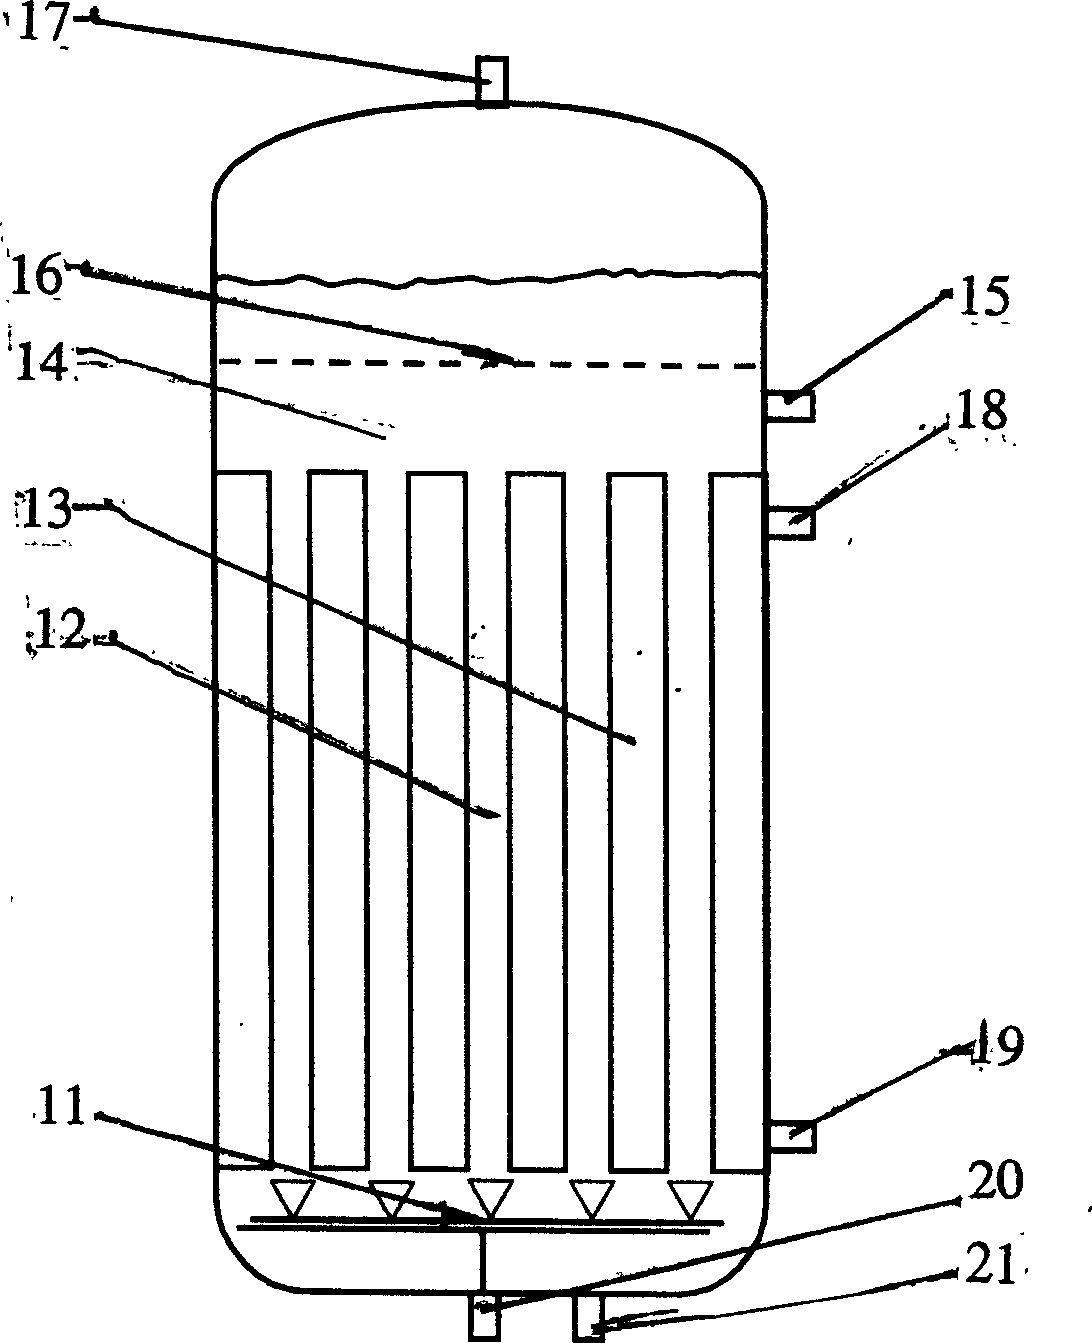 Method and apparatus for preparing solid natural gas